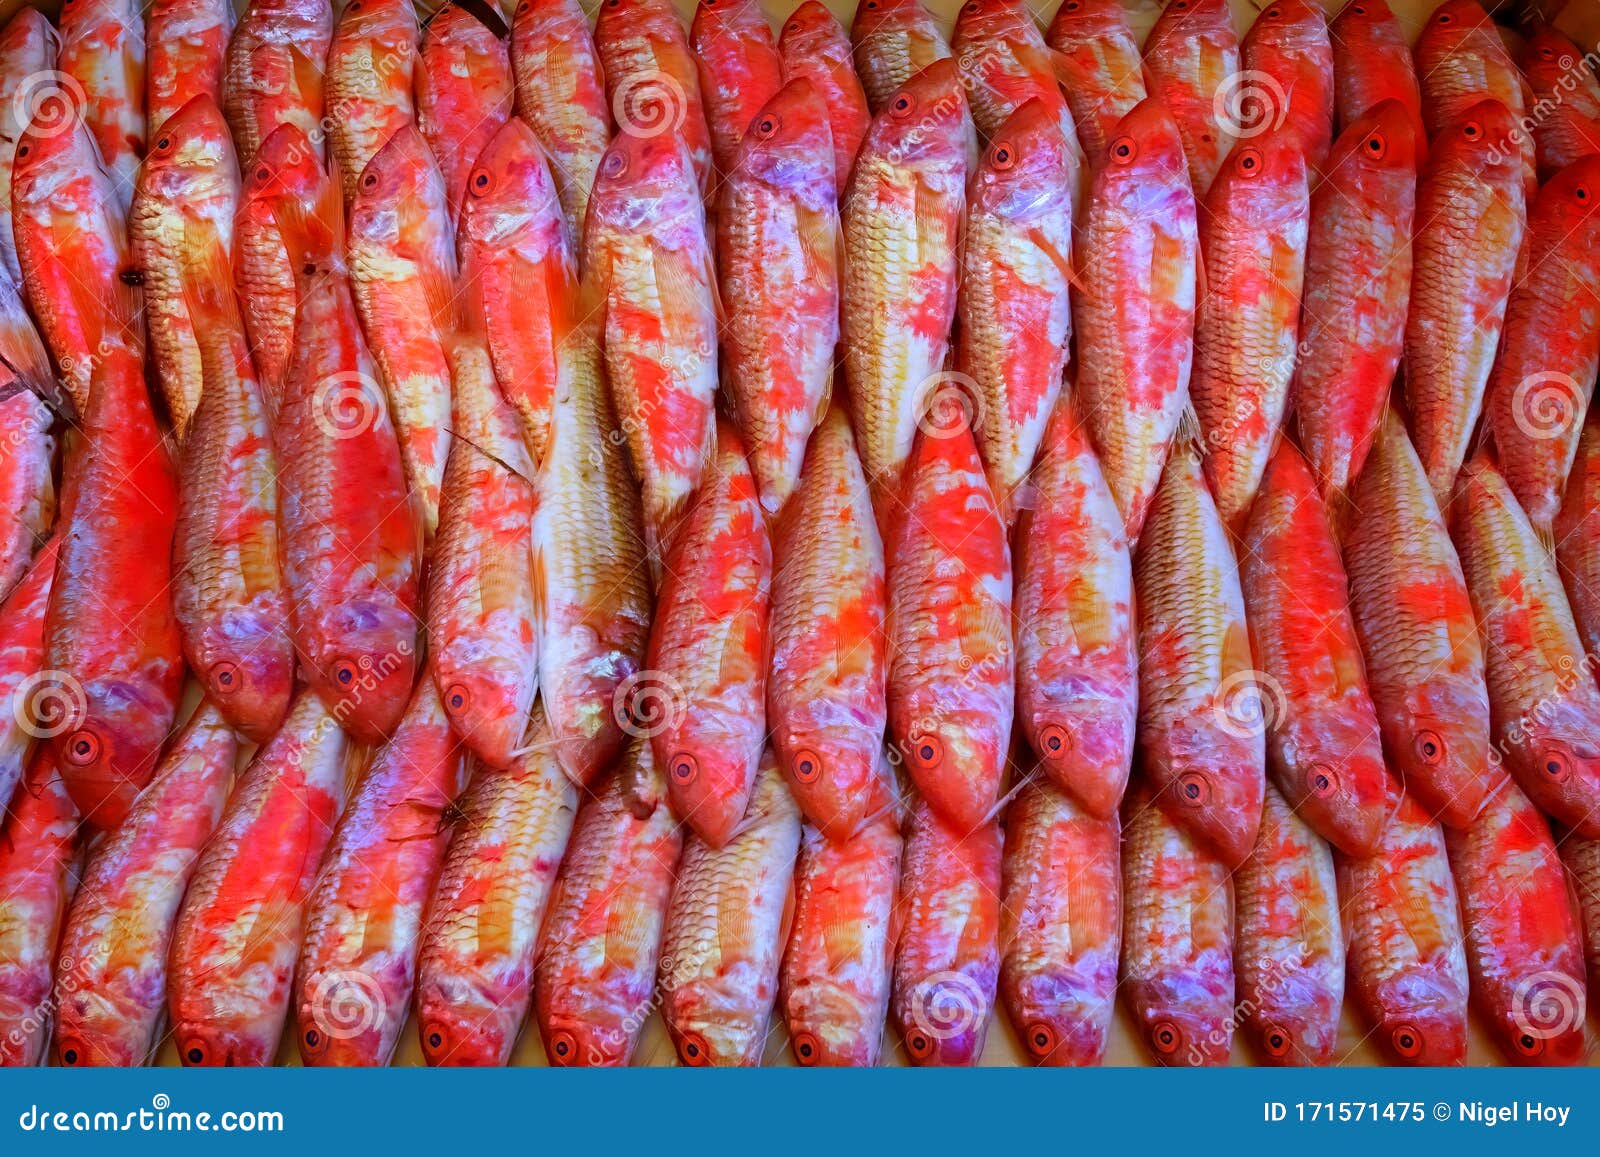 Red Mullet Fish Arranged In Fishmonger Shop Stock Image